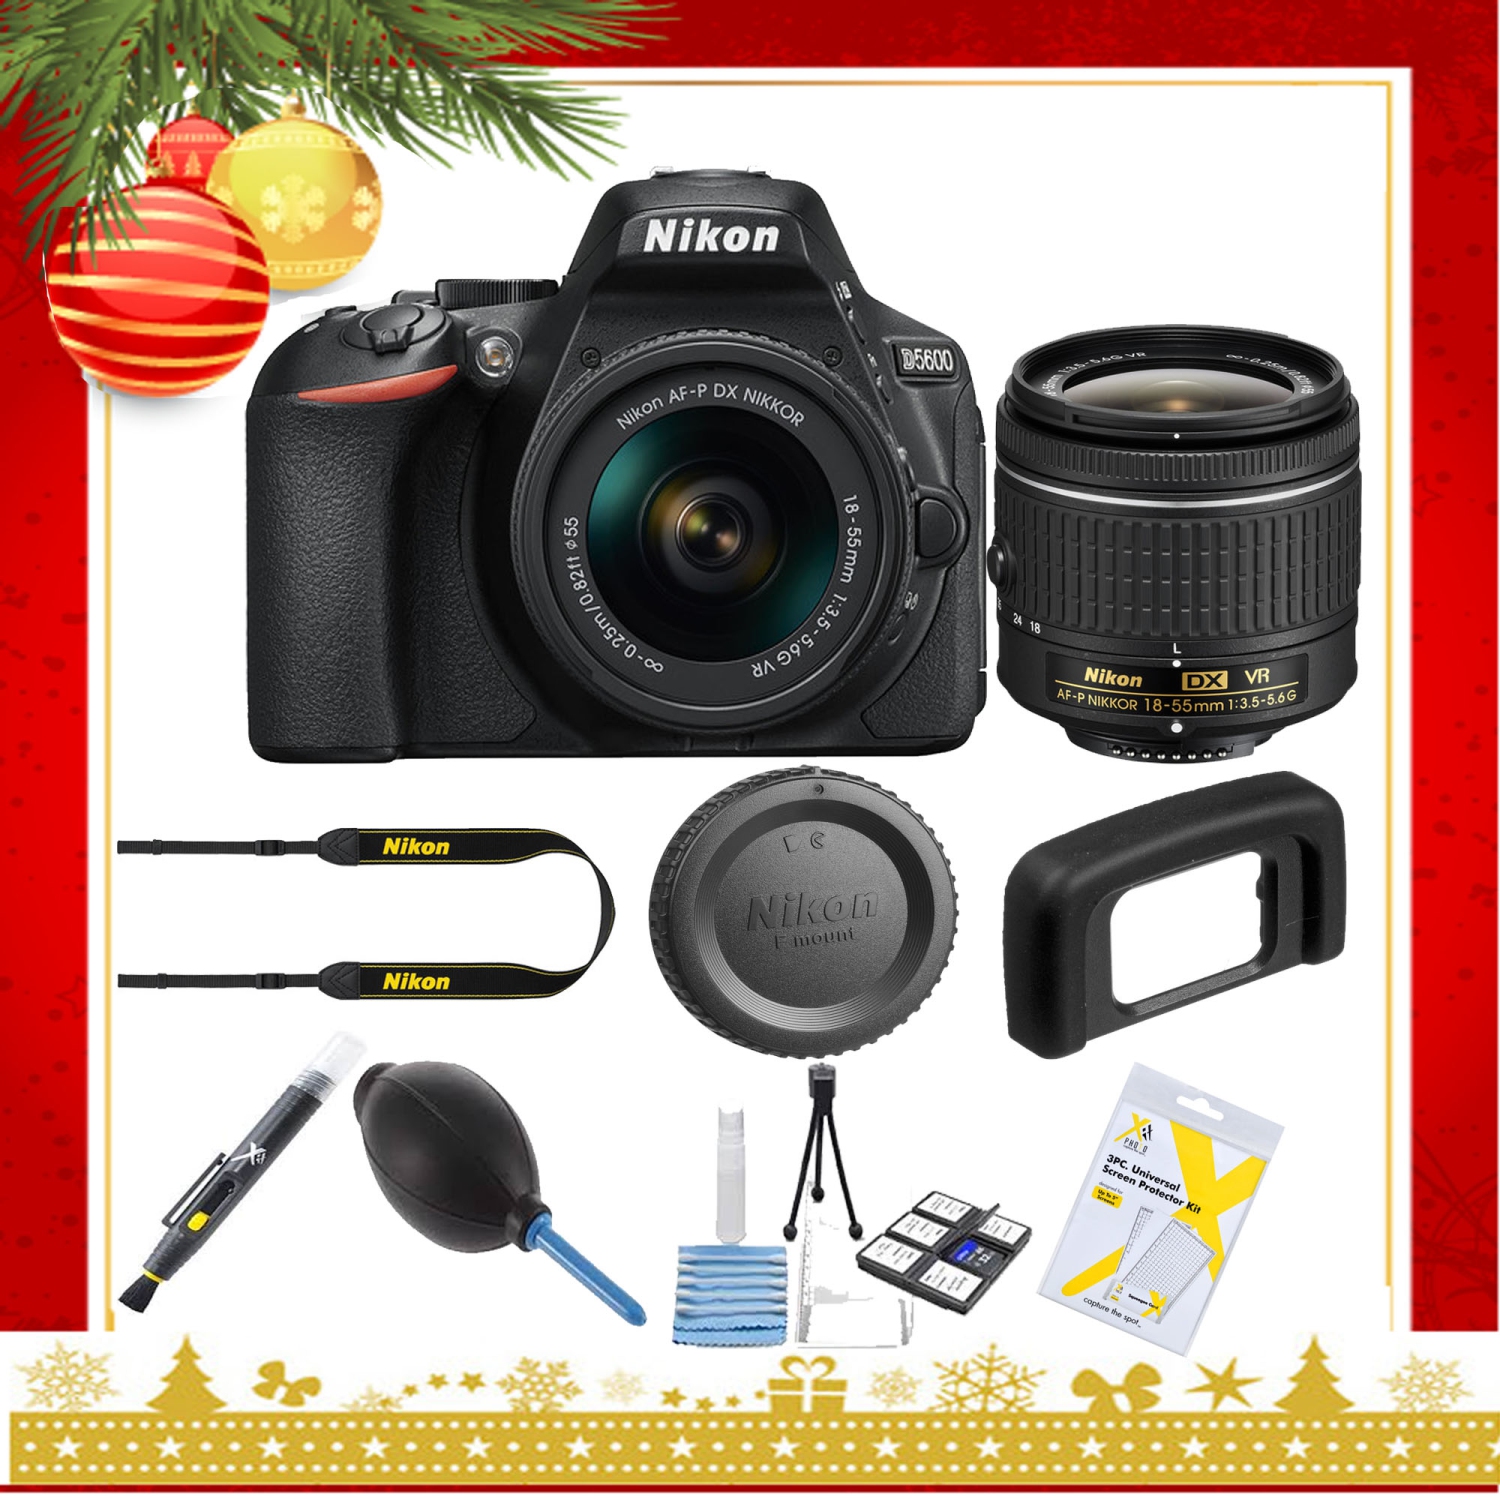 Nikon D5600 DSLR Camera with 18-55mm Lens (Black) |Cleaning Kit - Holiday Gift Special - US Version w/ Seller Warranty